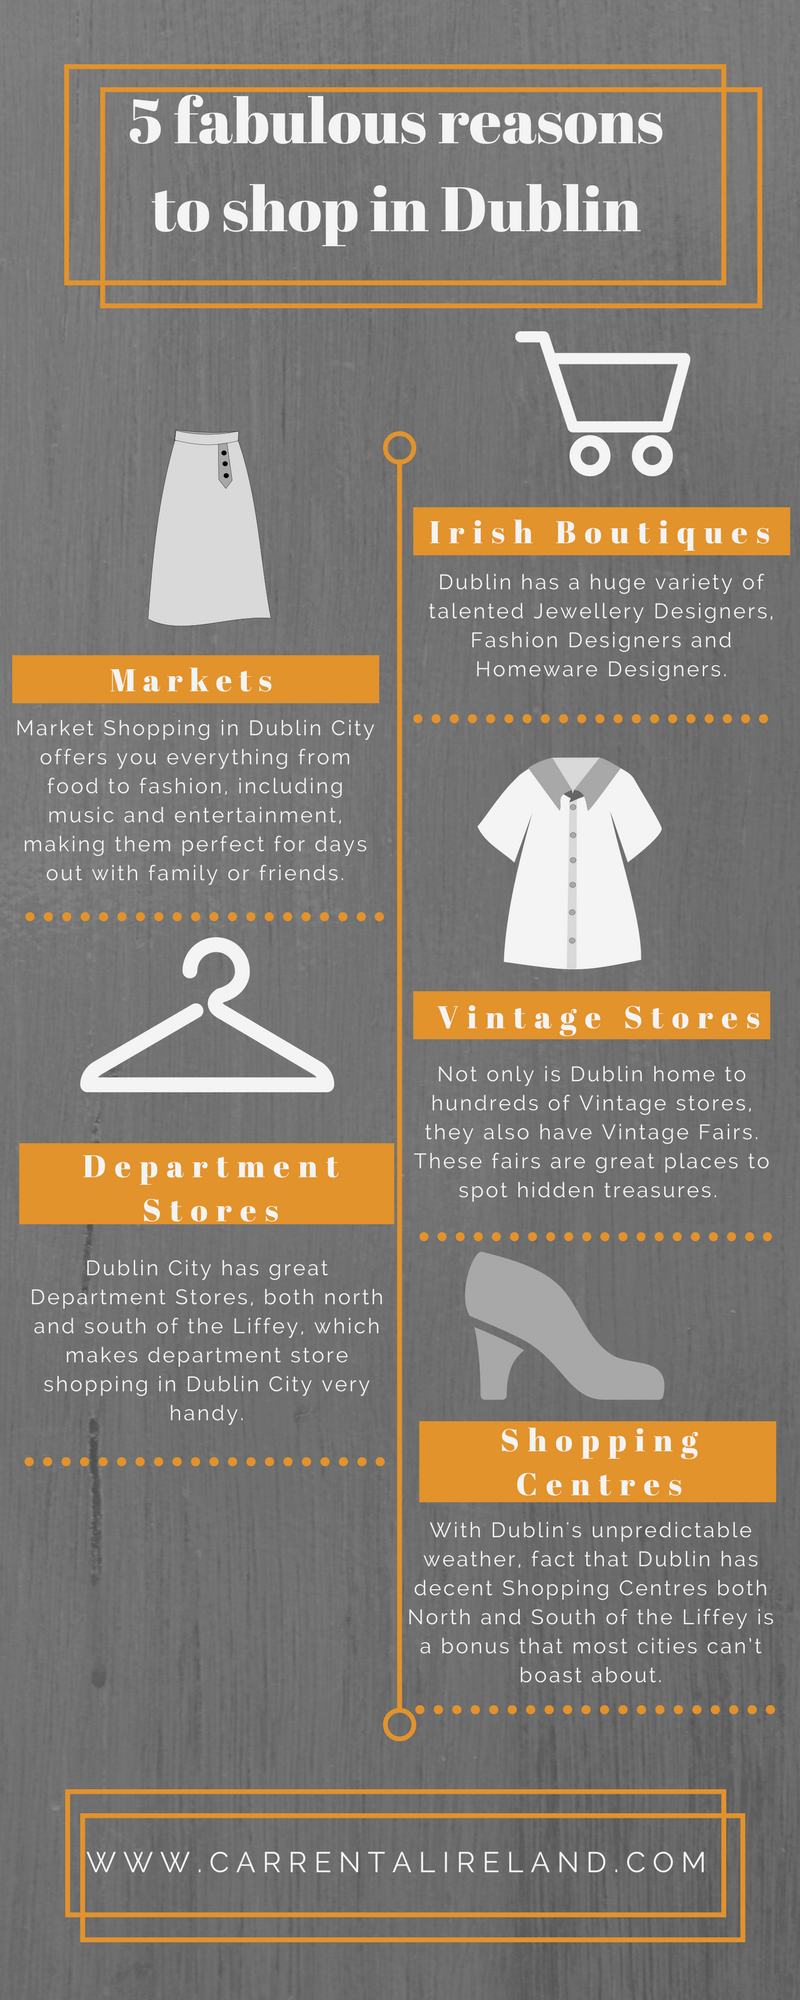 Reasons to Shop in Dulin infographic